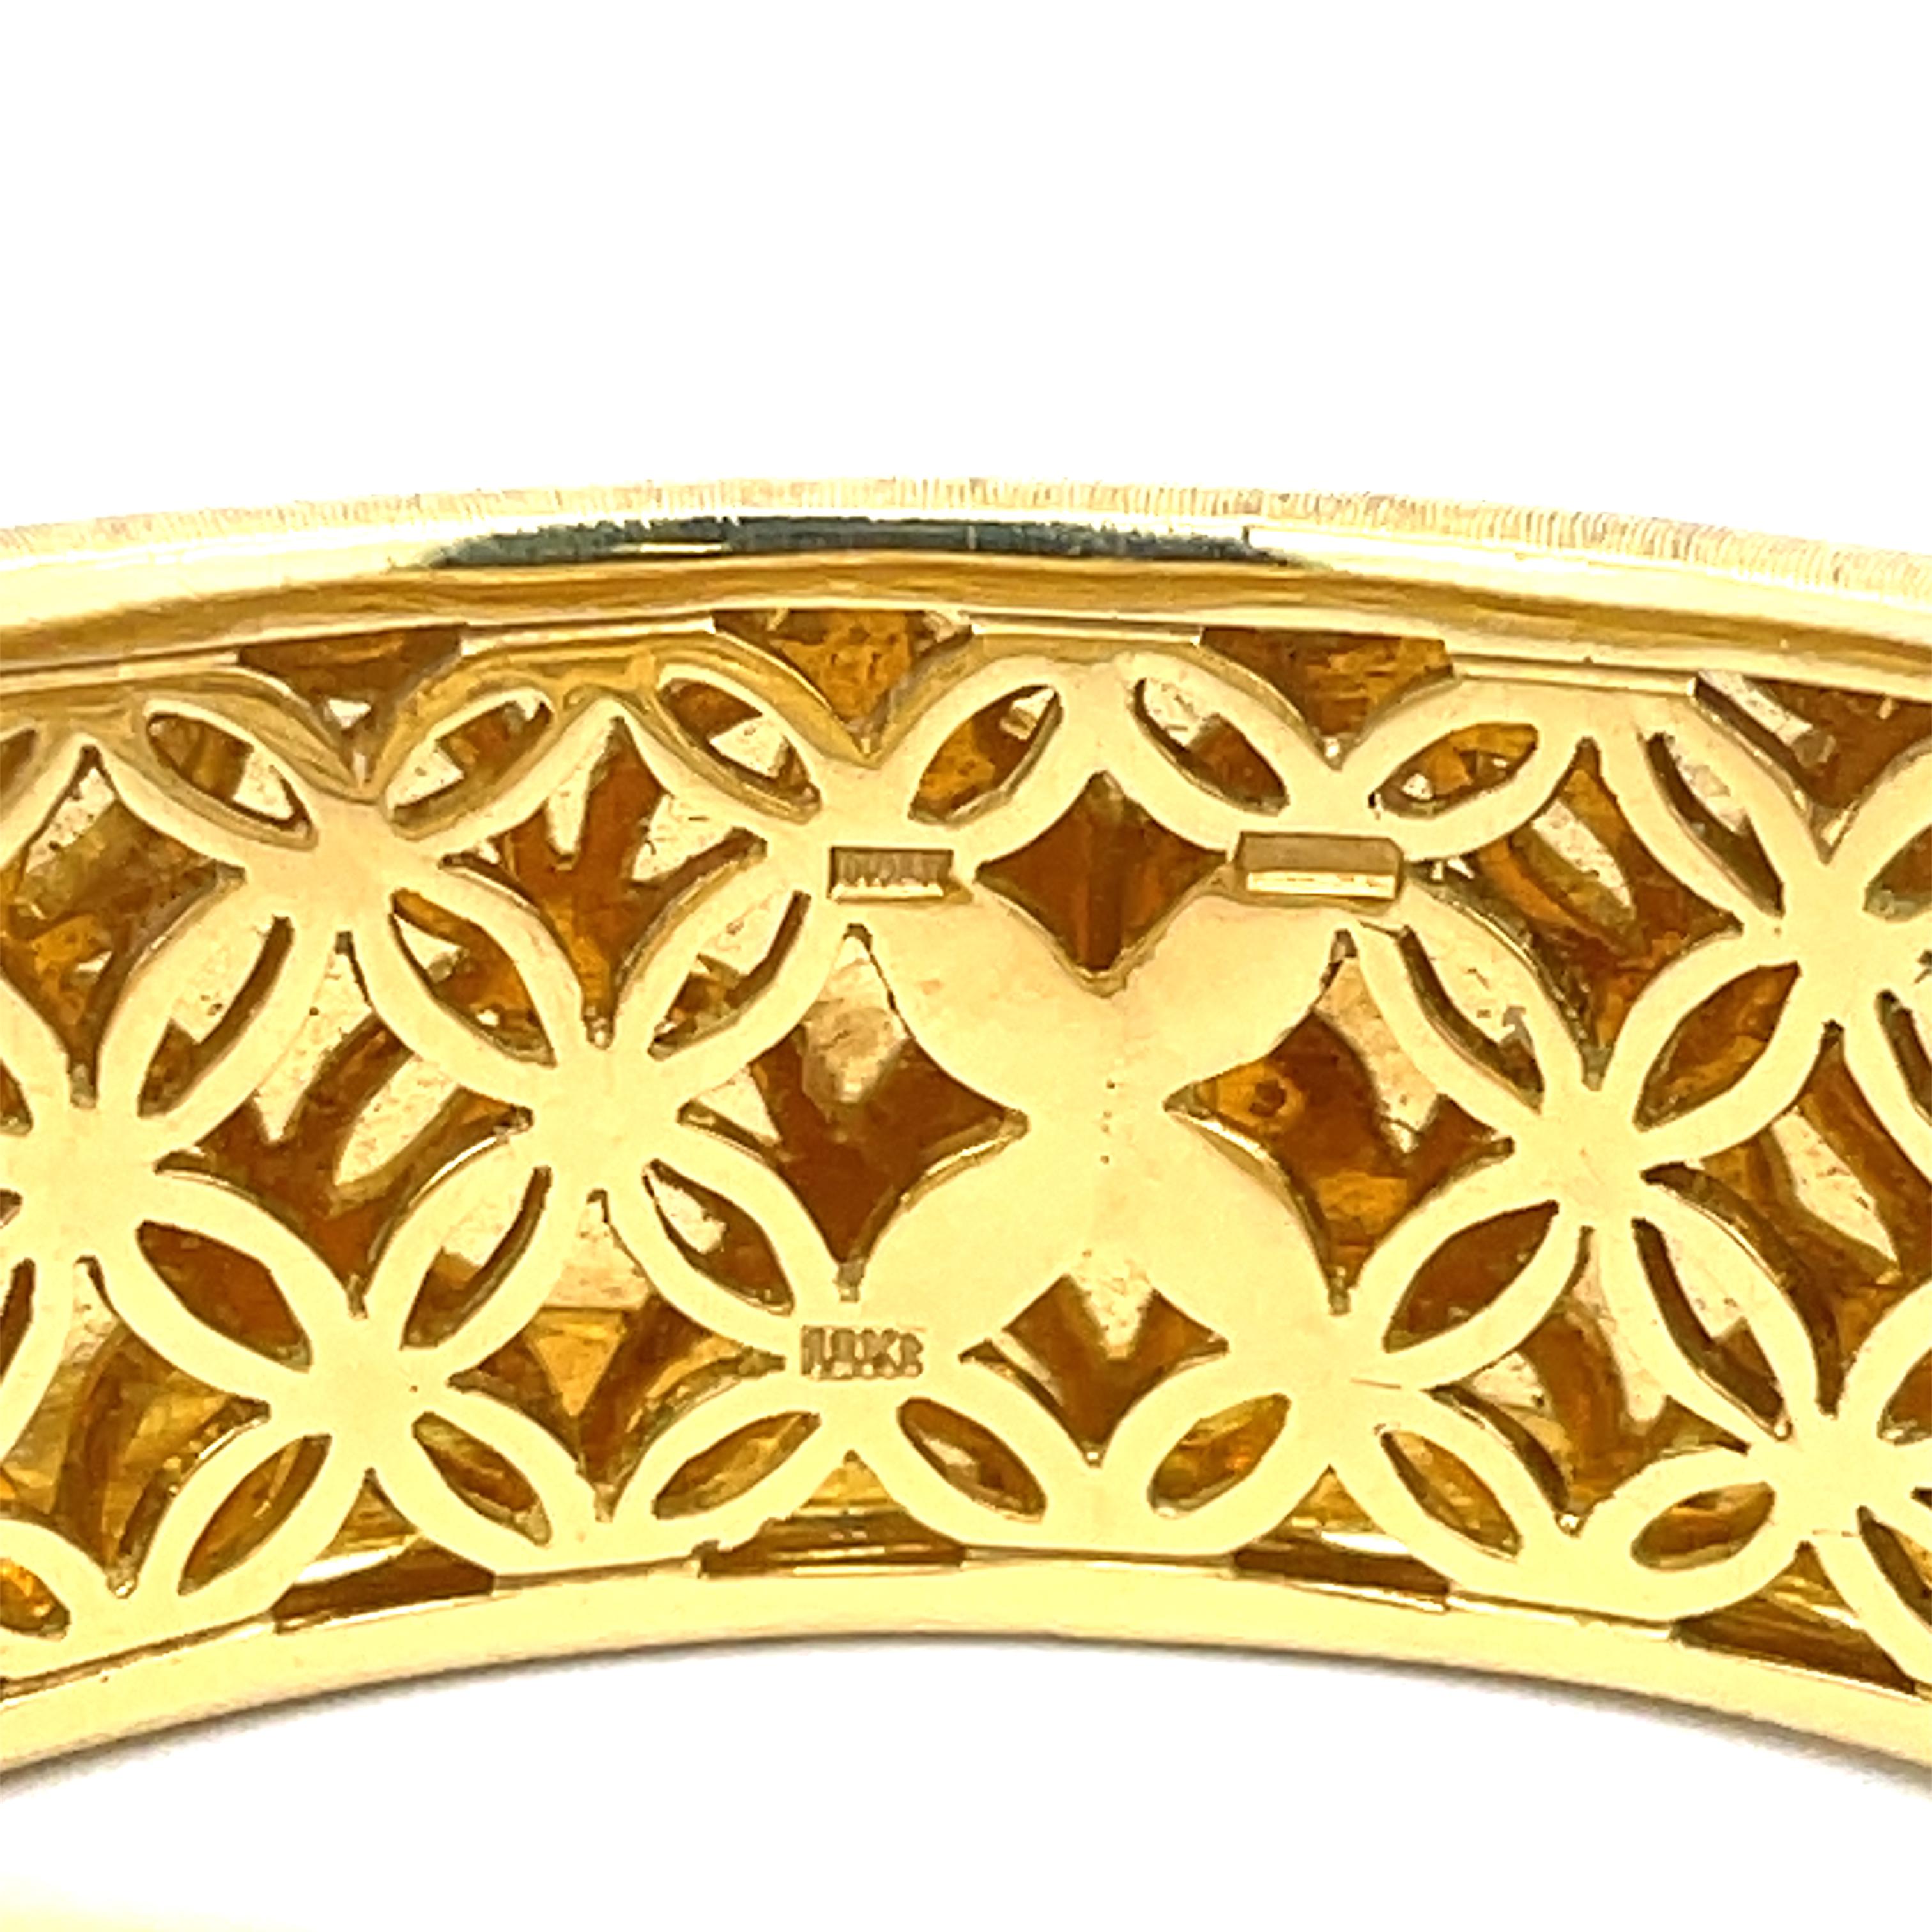 Italian Florentine Diamond Cuff in 18K Yellow Gold. The cuff features 1.60ctw of brilliant round diamonds, G-H in color, VS clarity. The cuff is hinged and has an invisible clasp. About 1.50 inches at widest point, tapering down to 0.75 inches, 7